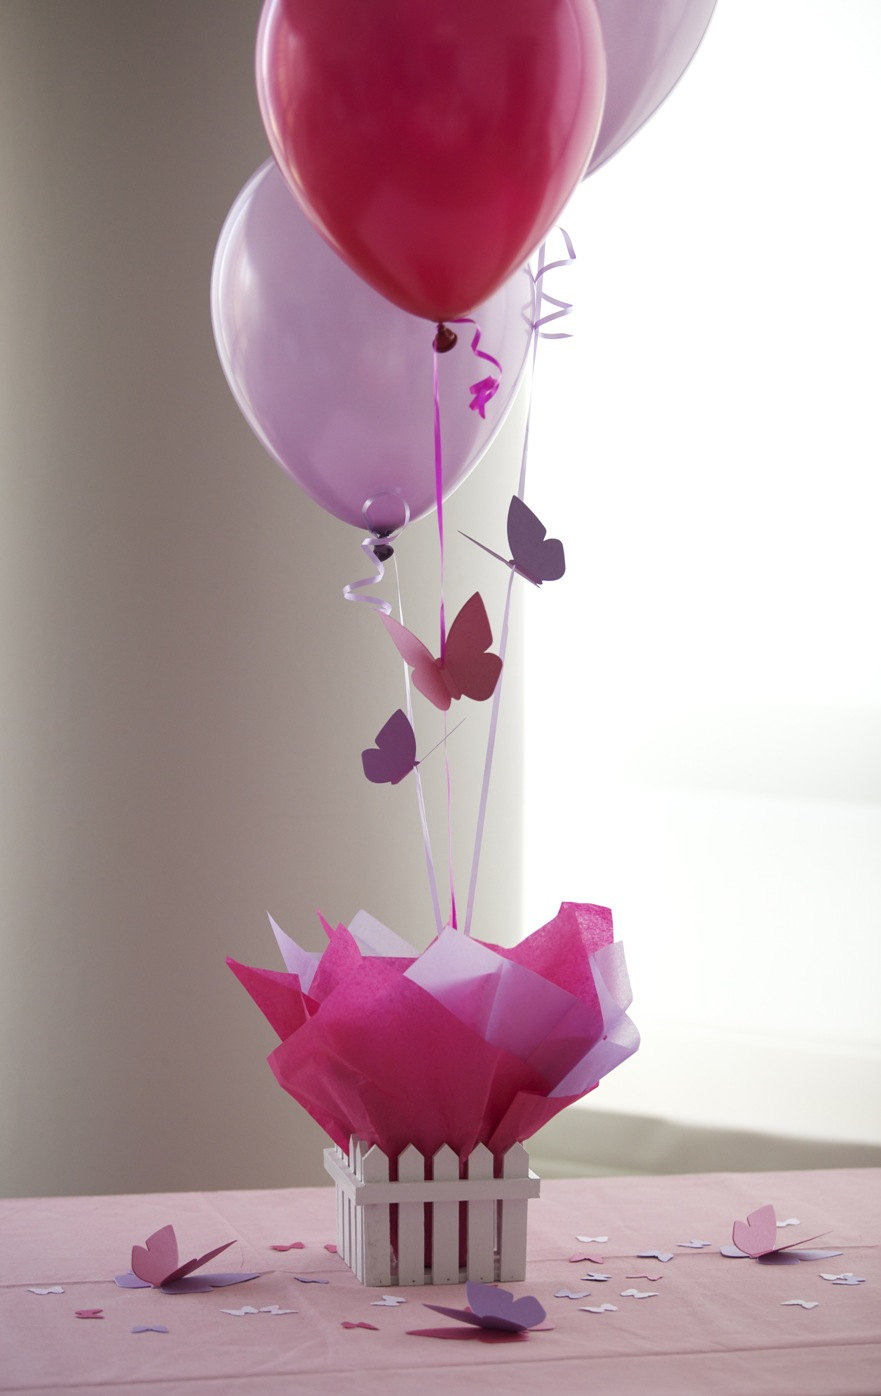  Balloon  Designs Pictures Balloon  Centerpieces For Decorations 